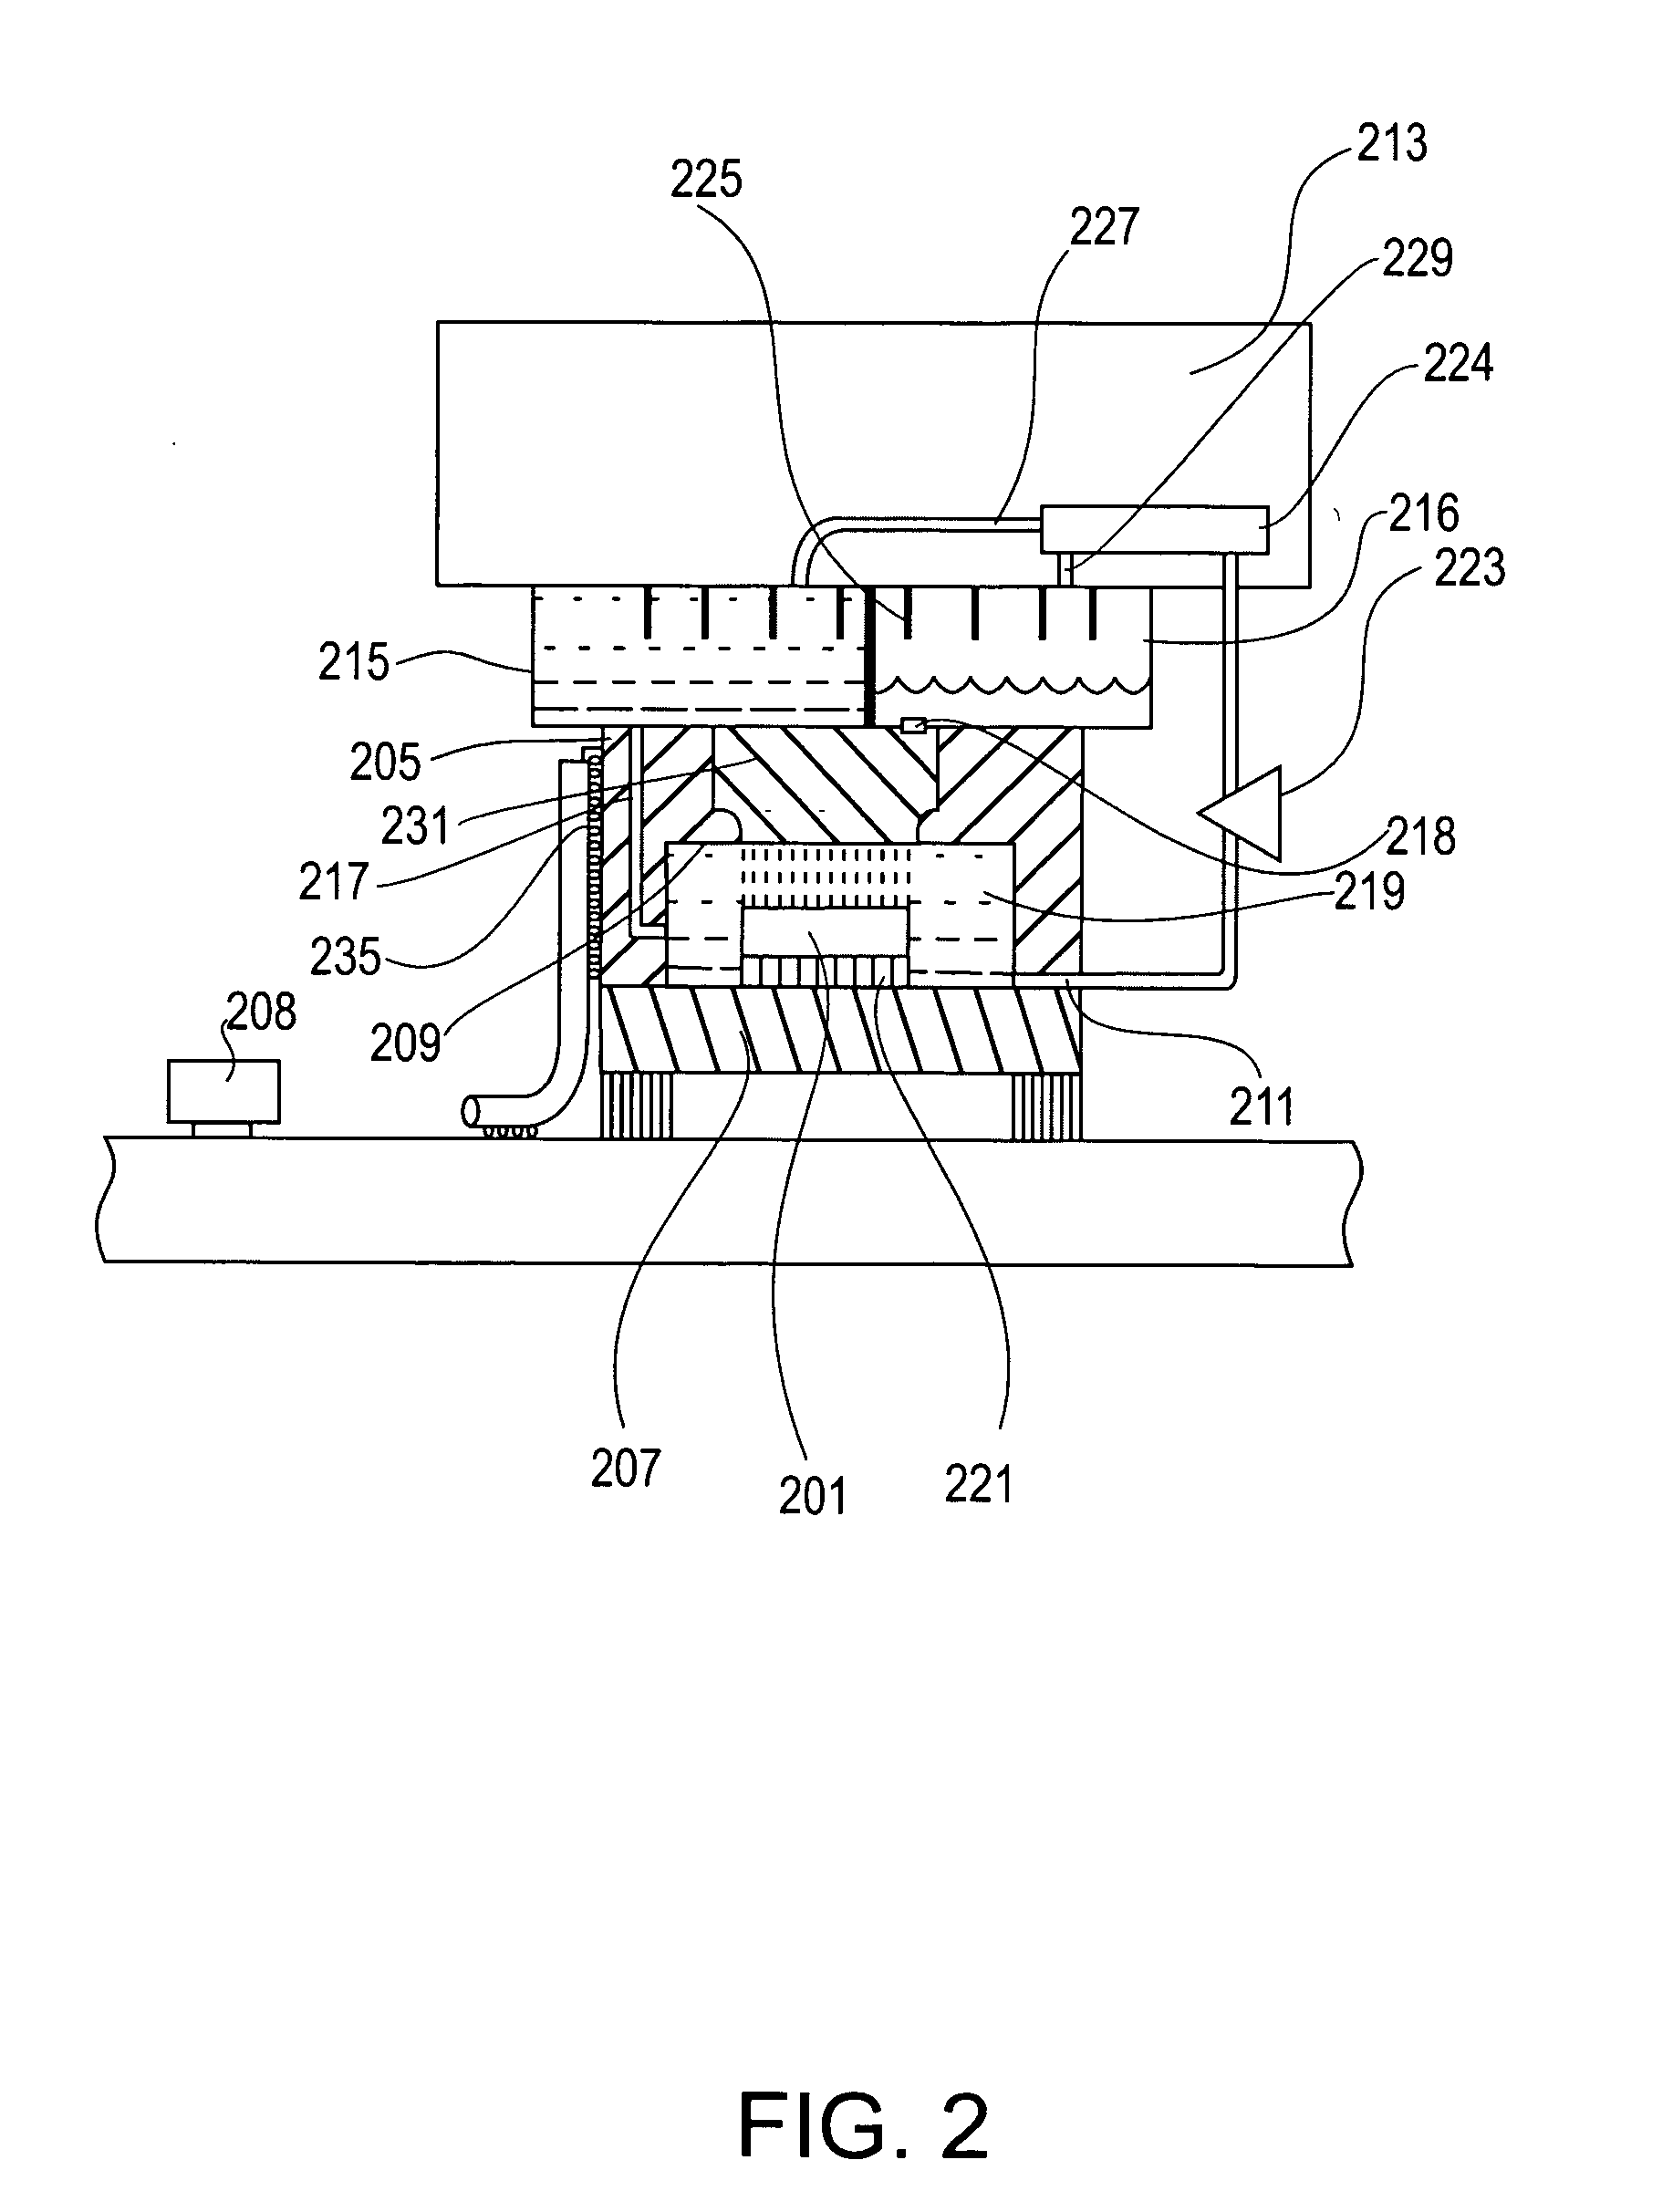 Two-fluid spray cooling system